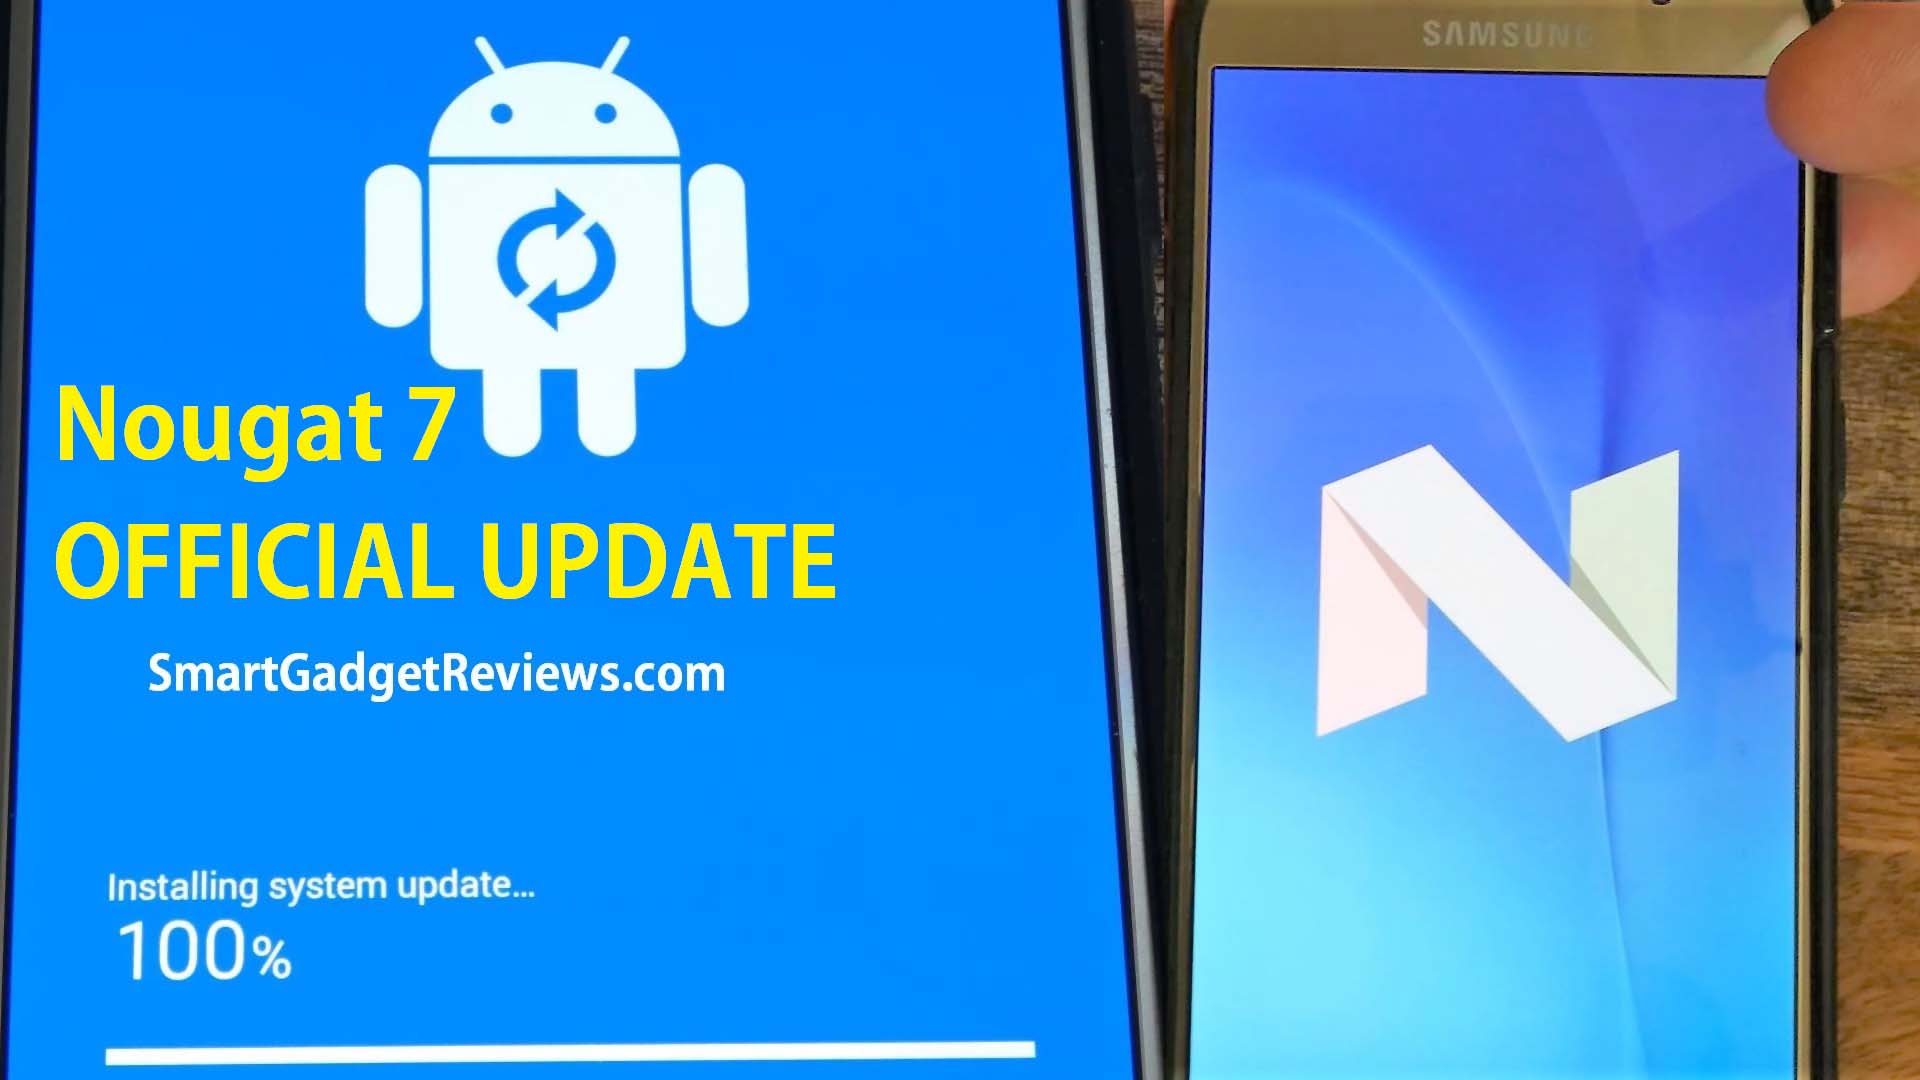 How To Get Samsung Nougat 7 Android Update for Mobile phone